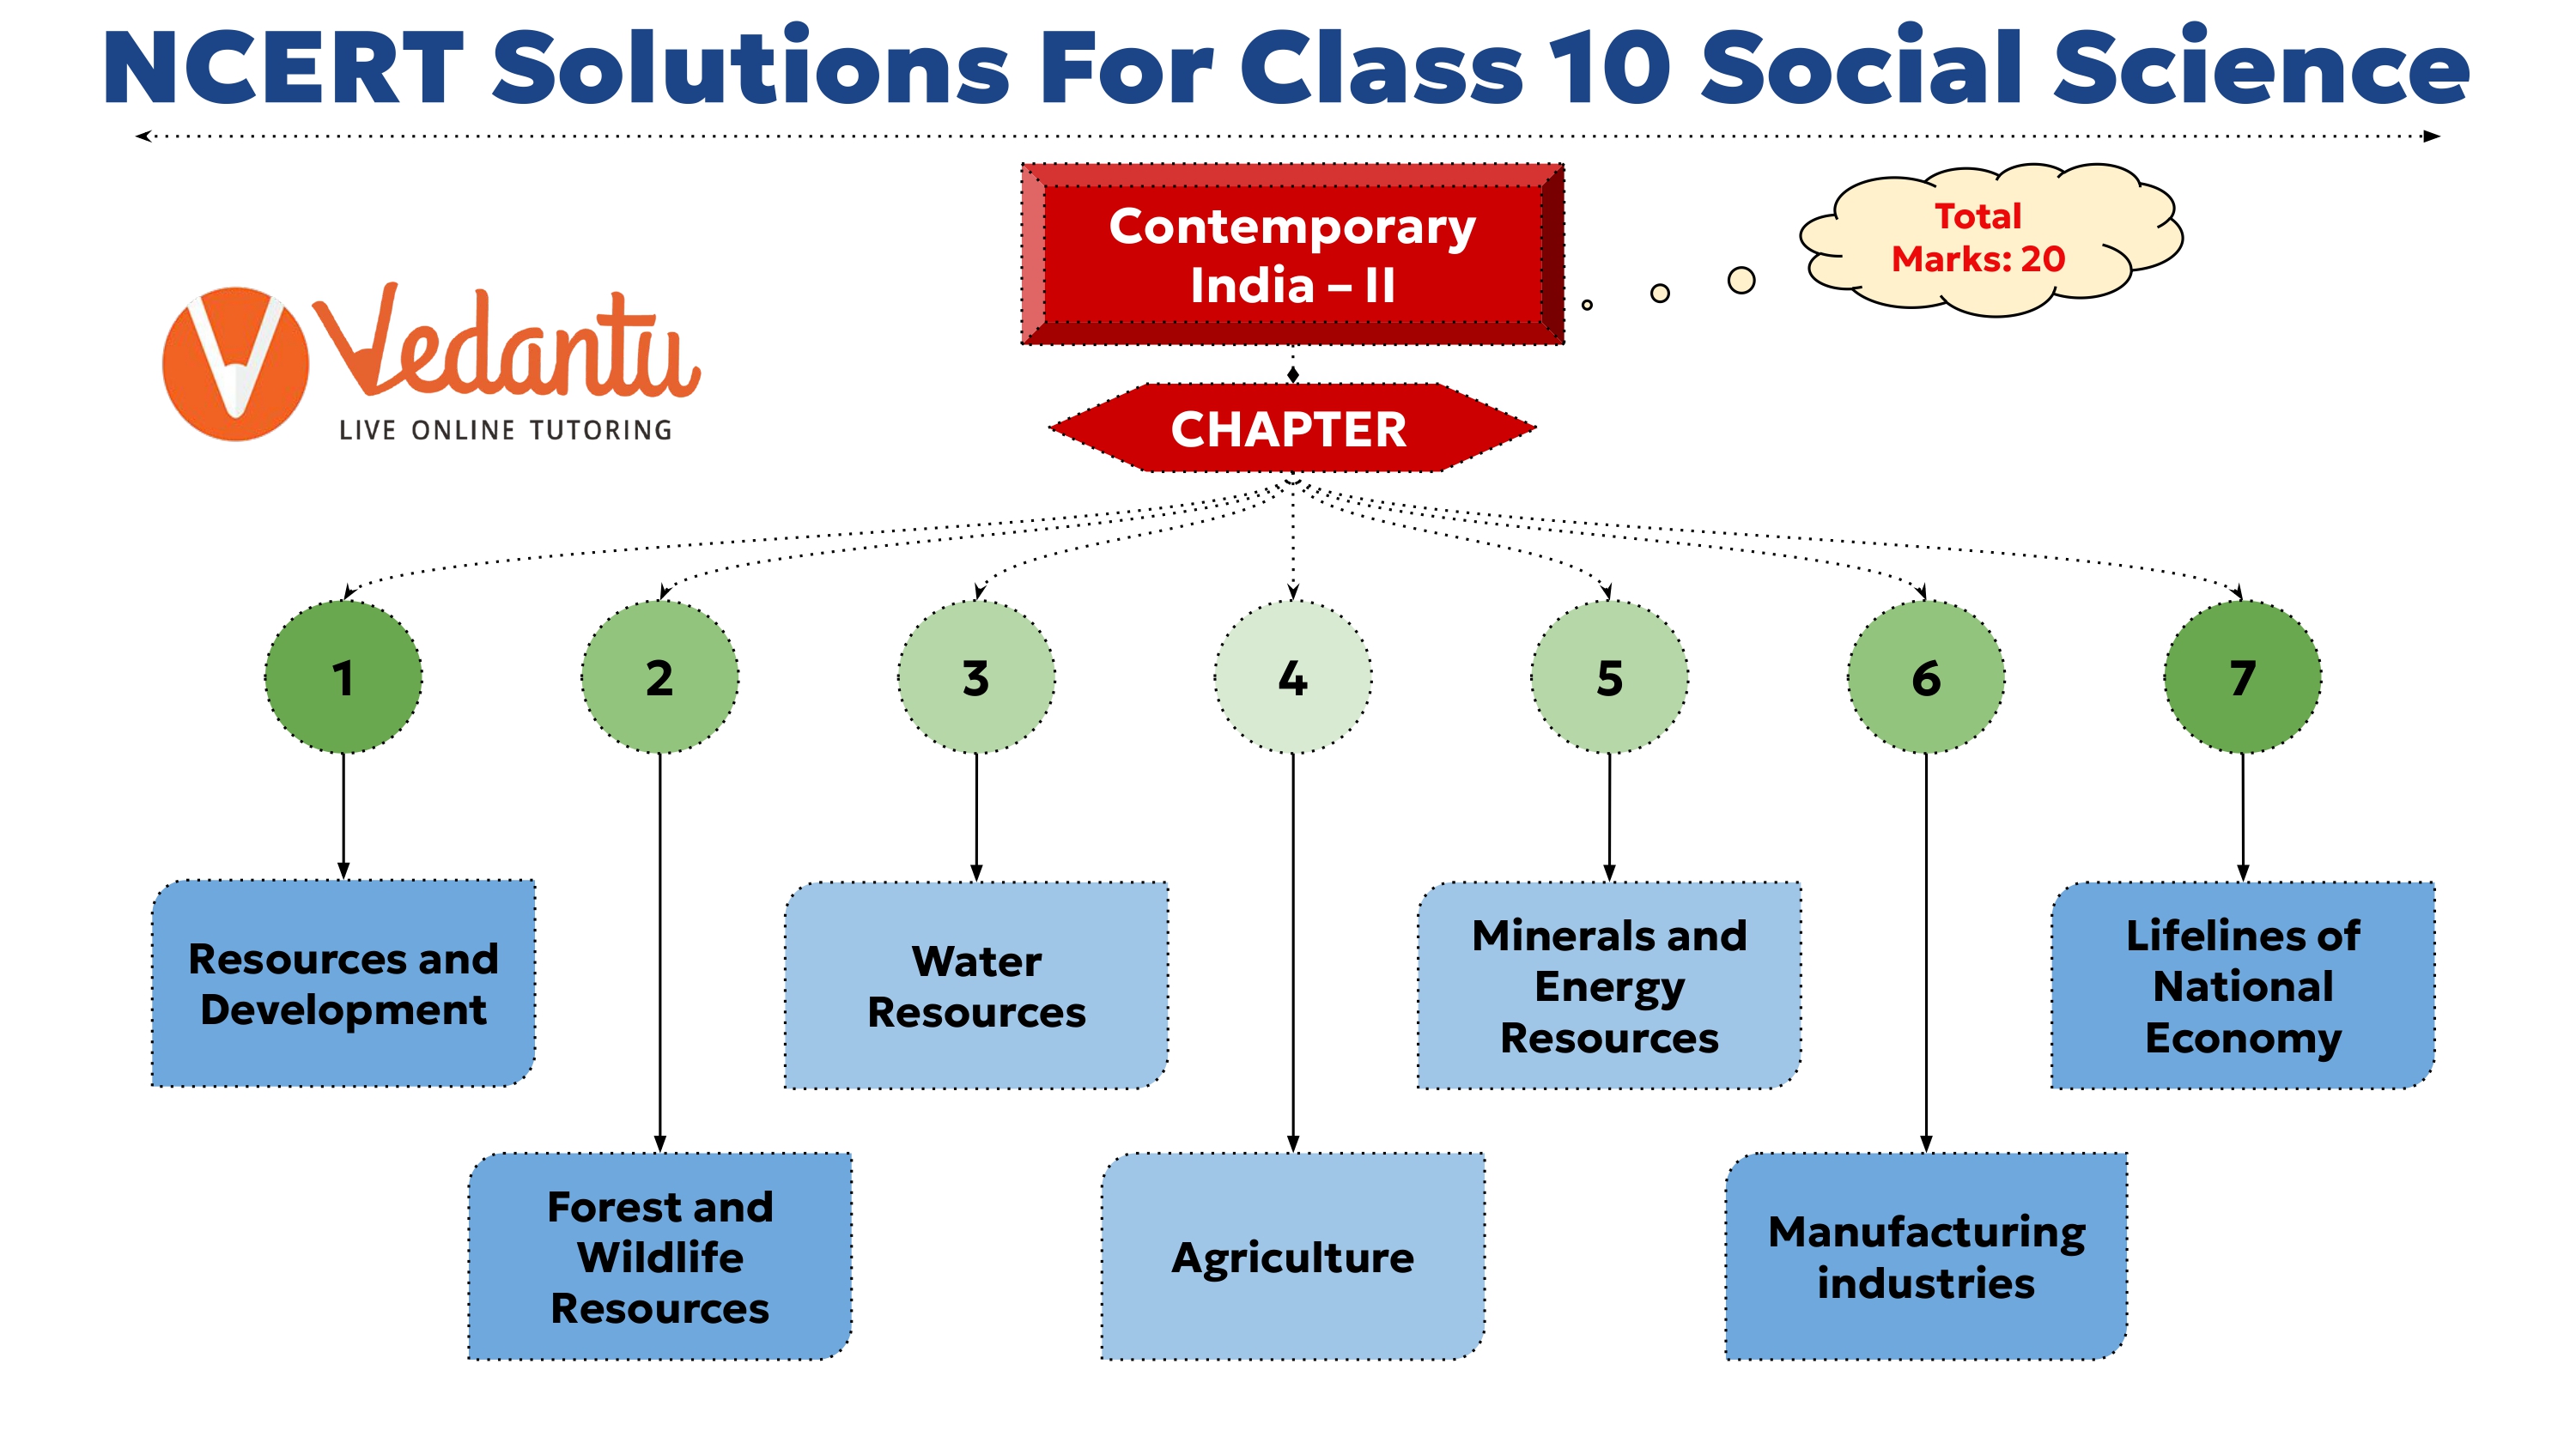 NCERT Solutions for Class 10 Social Science - Contemporary India Overview